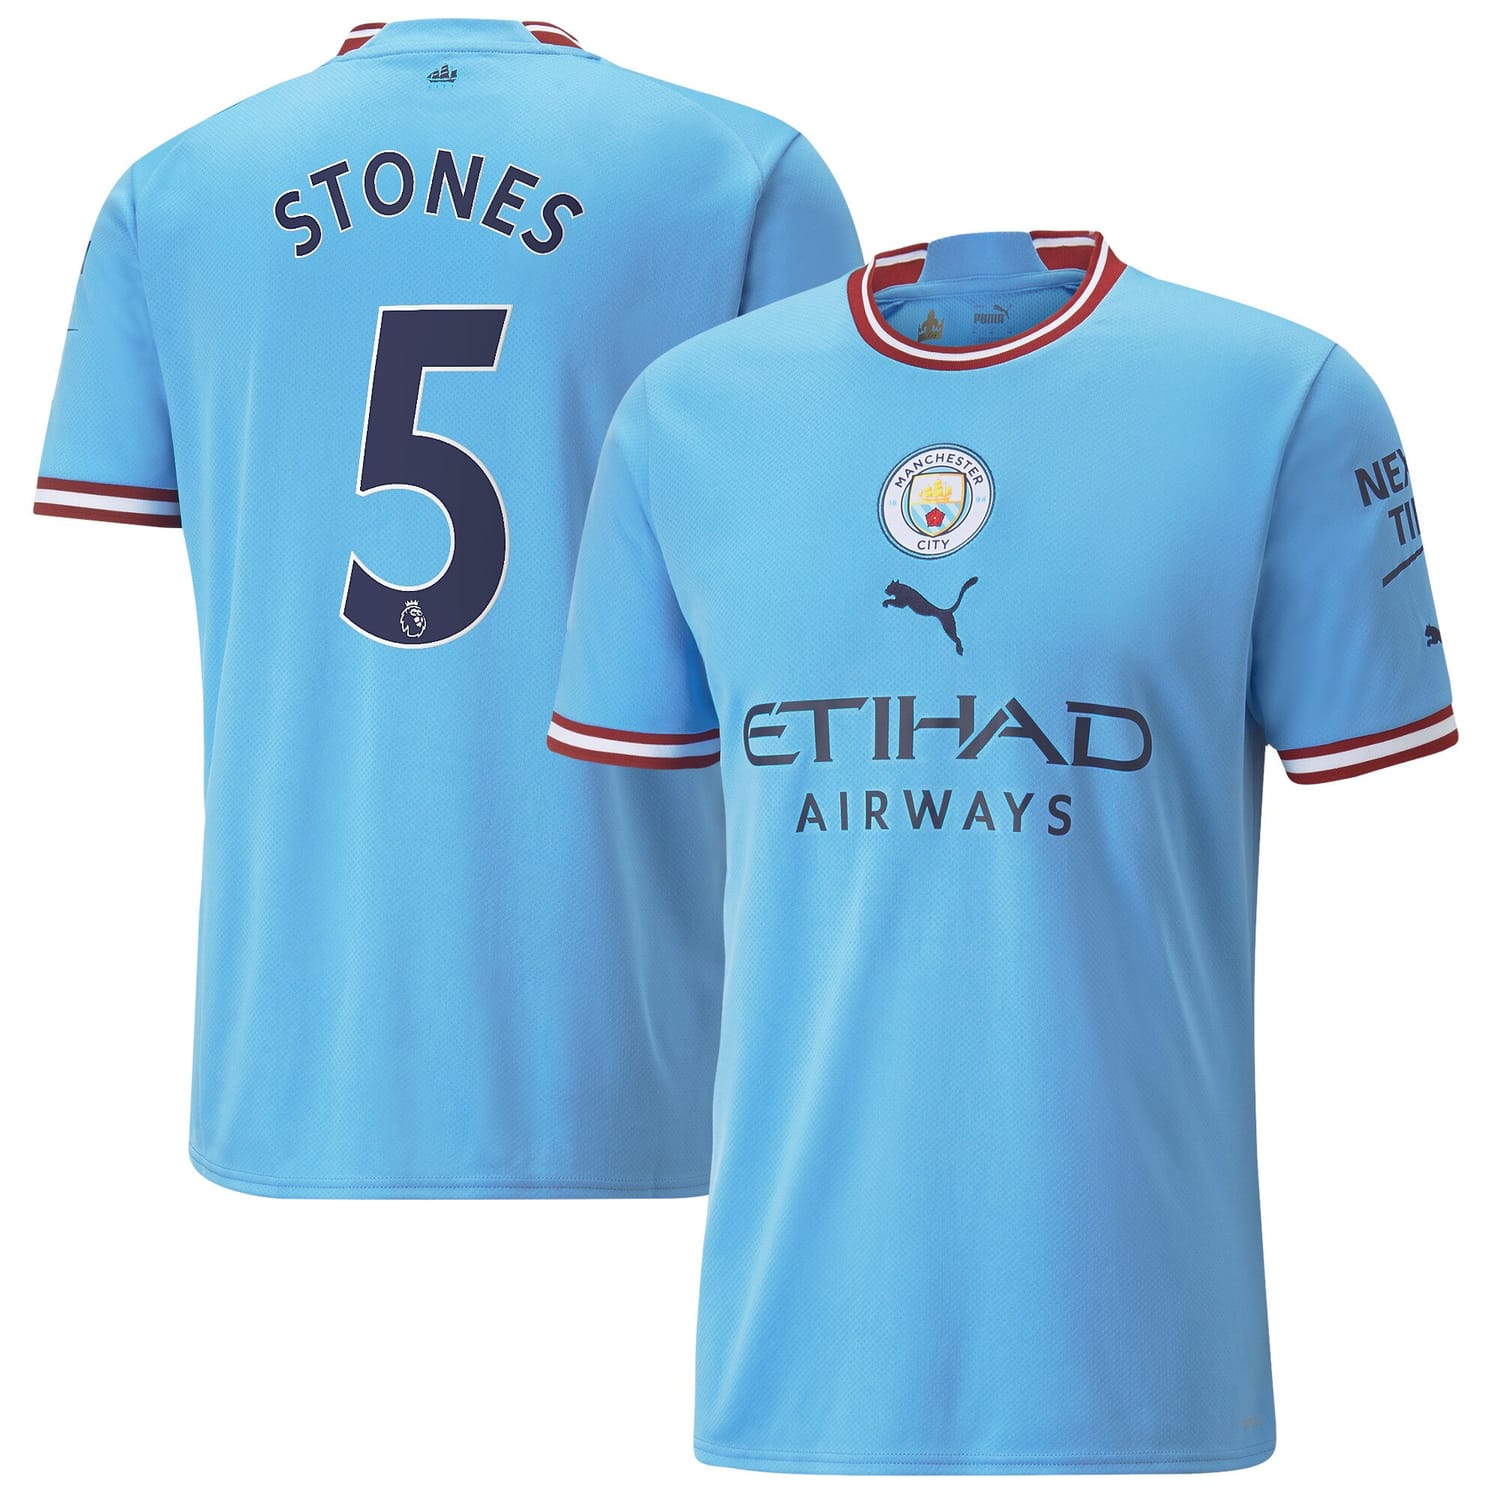 Premier League Manchester City Home Jersey Shirt 2022-23 player Stones 5 printing for Men